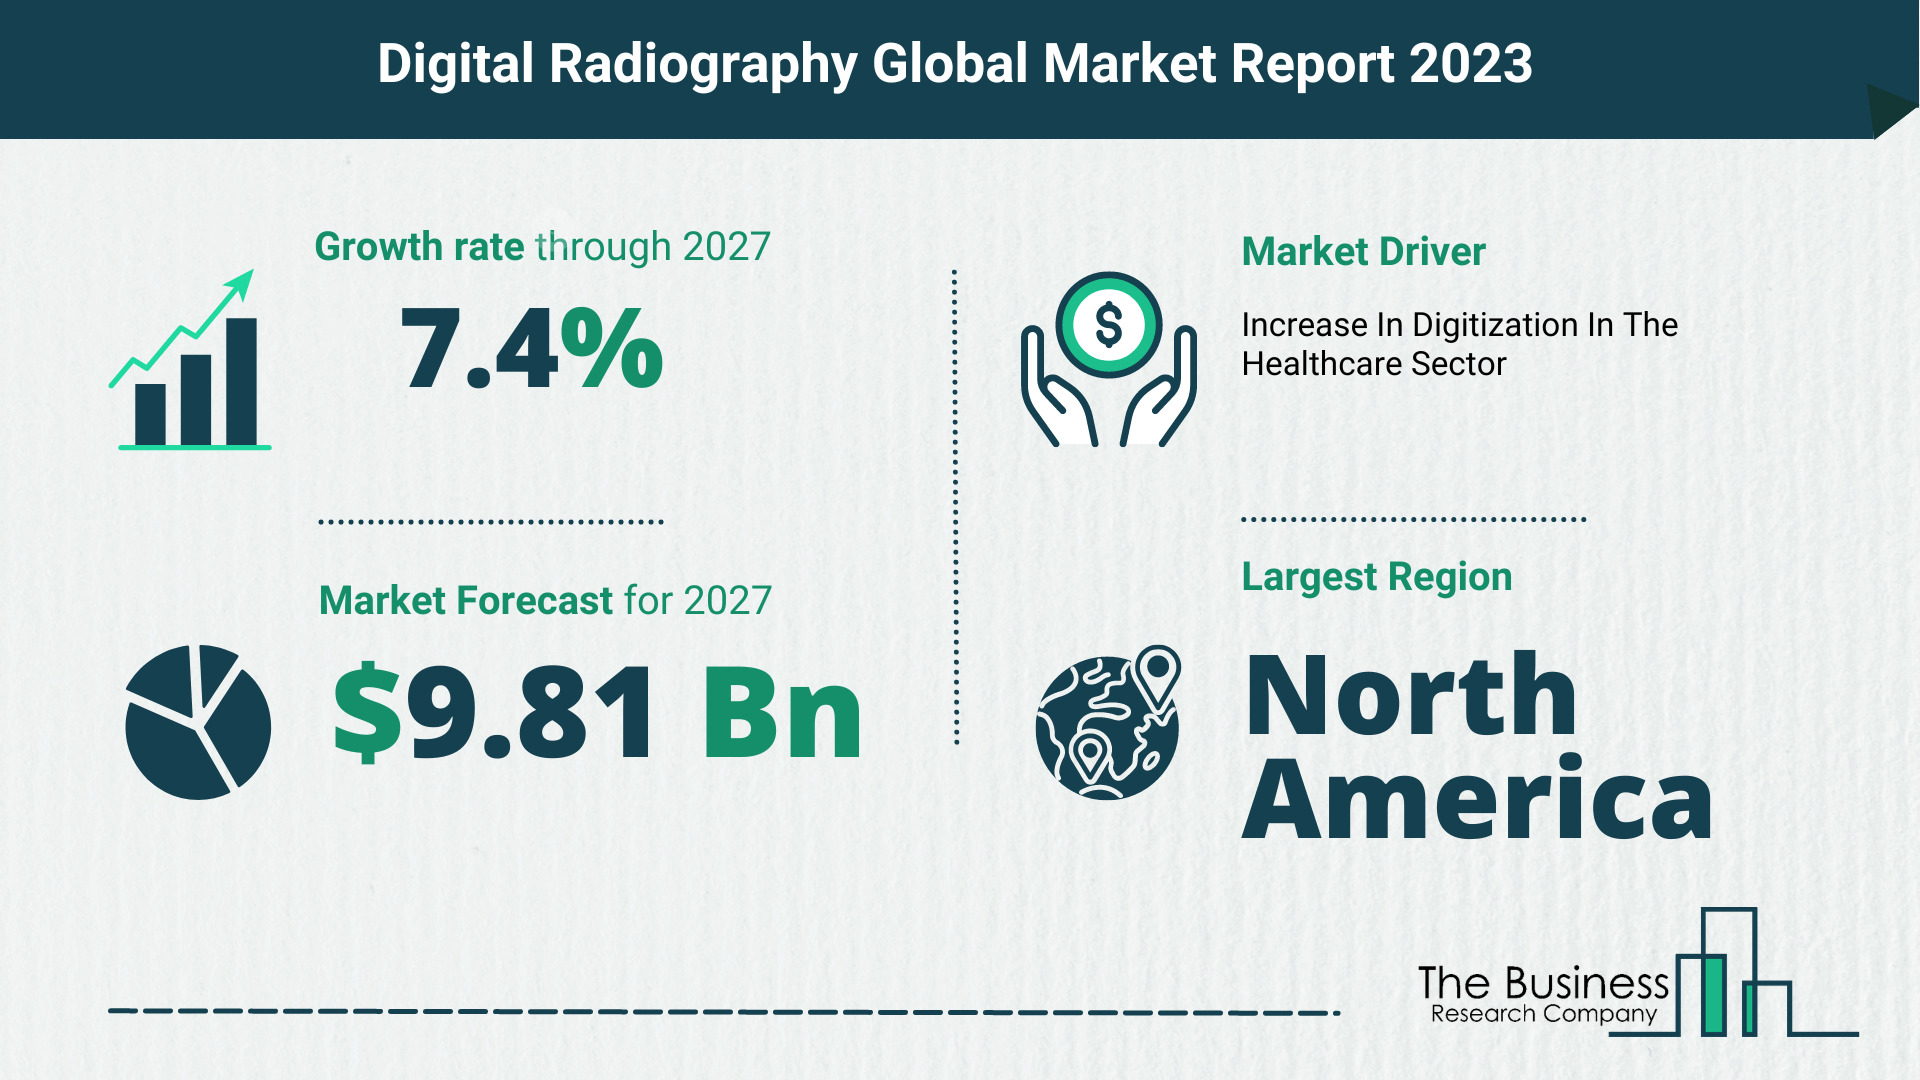 What Will The Digital Radiography Market Look Like In 2023?